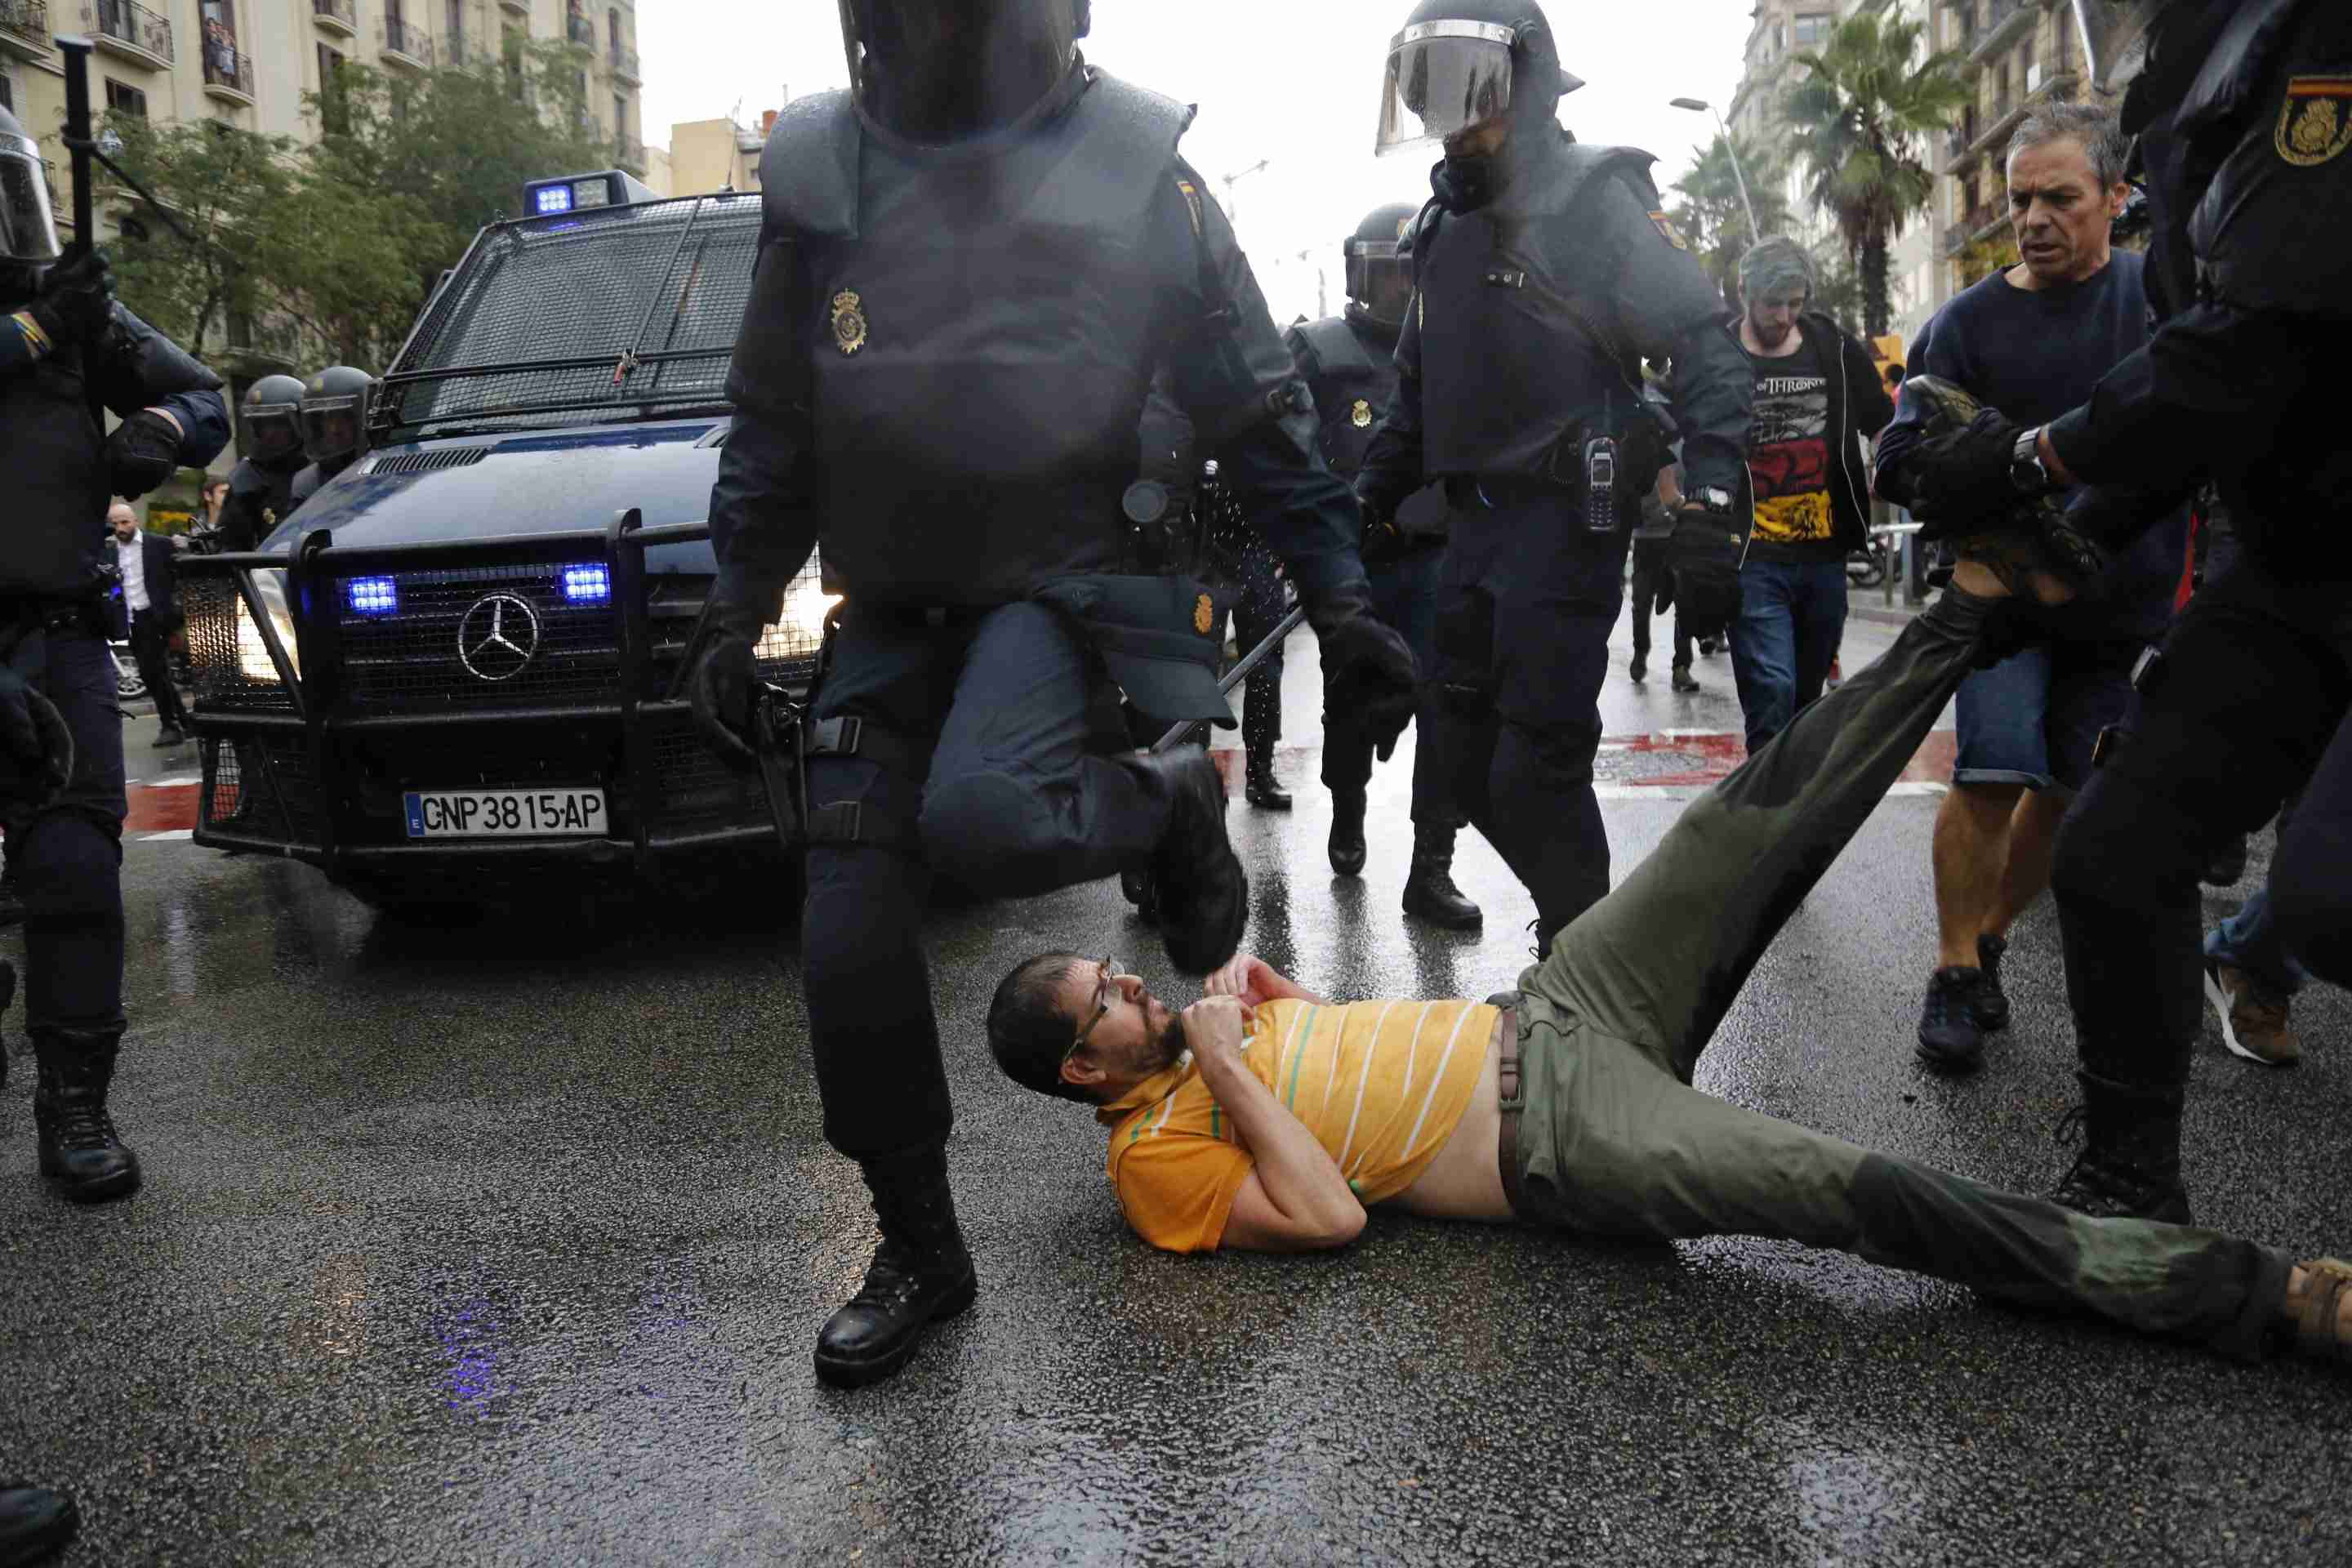 Spanish policeman says he beat Catalan referendum voter to give a "wake-up call"